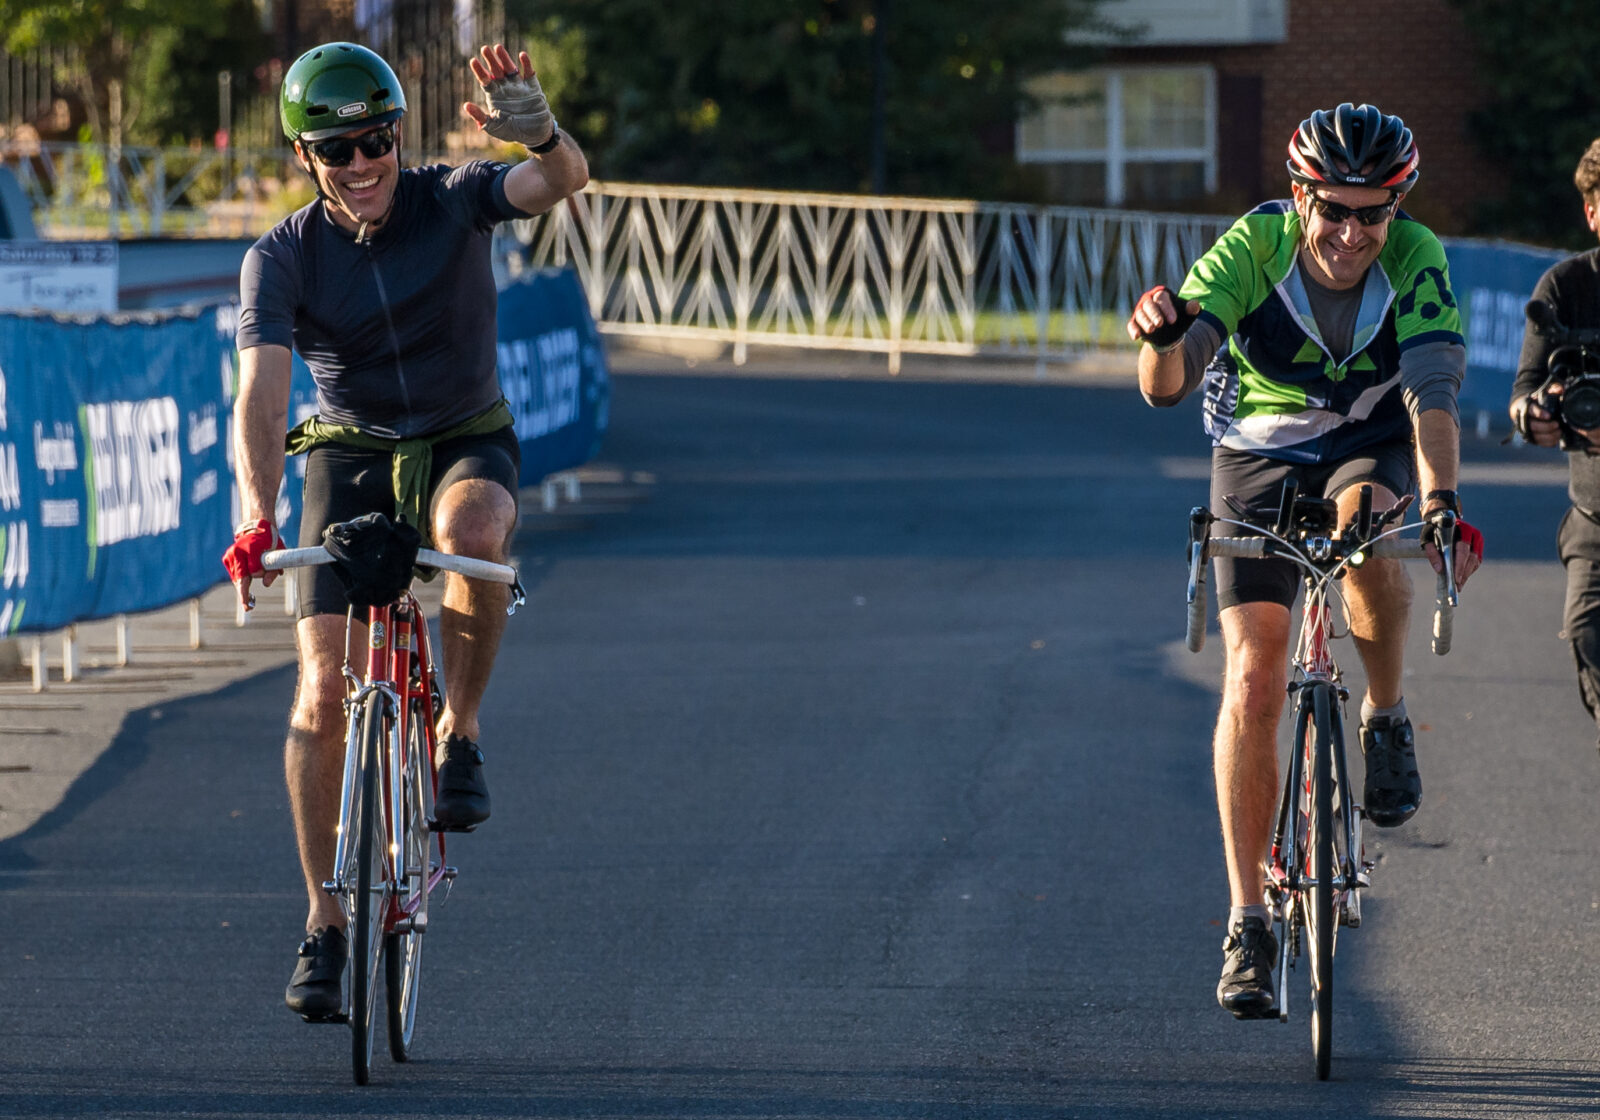 Two BellRinger riders crossing the finish line and waving